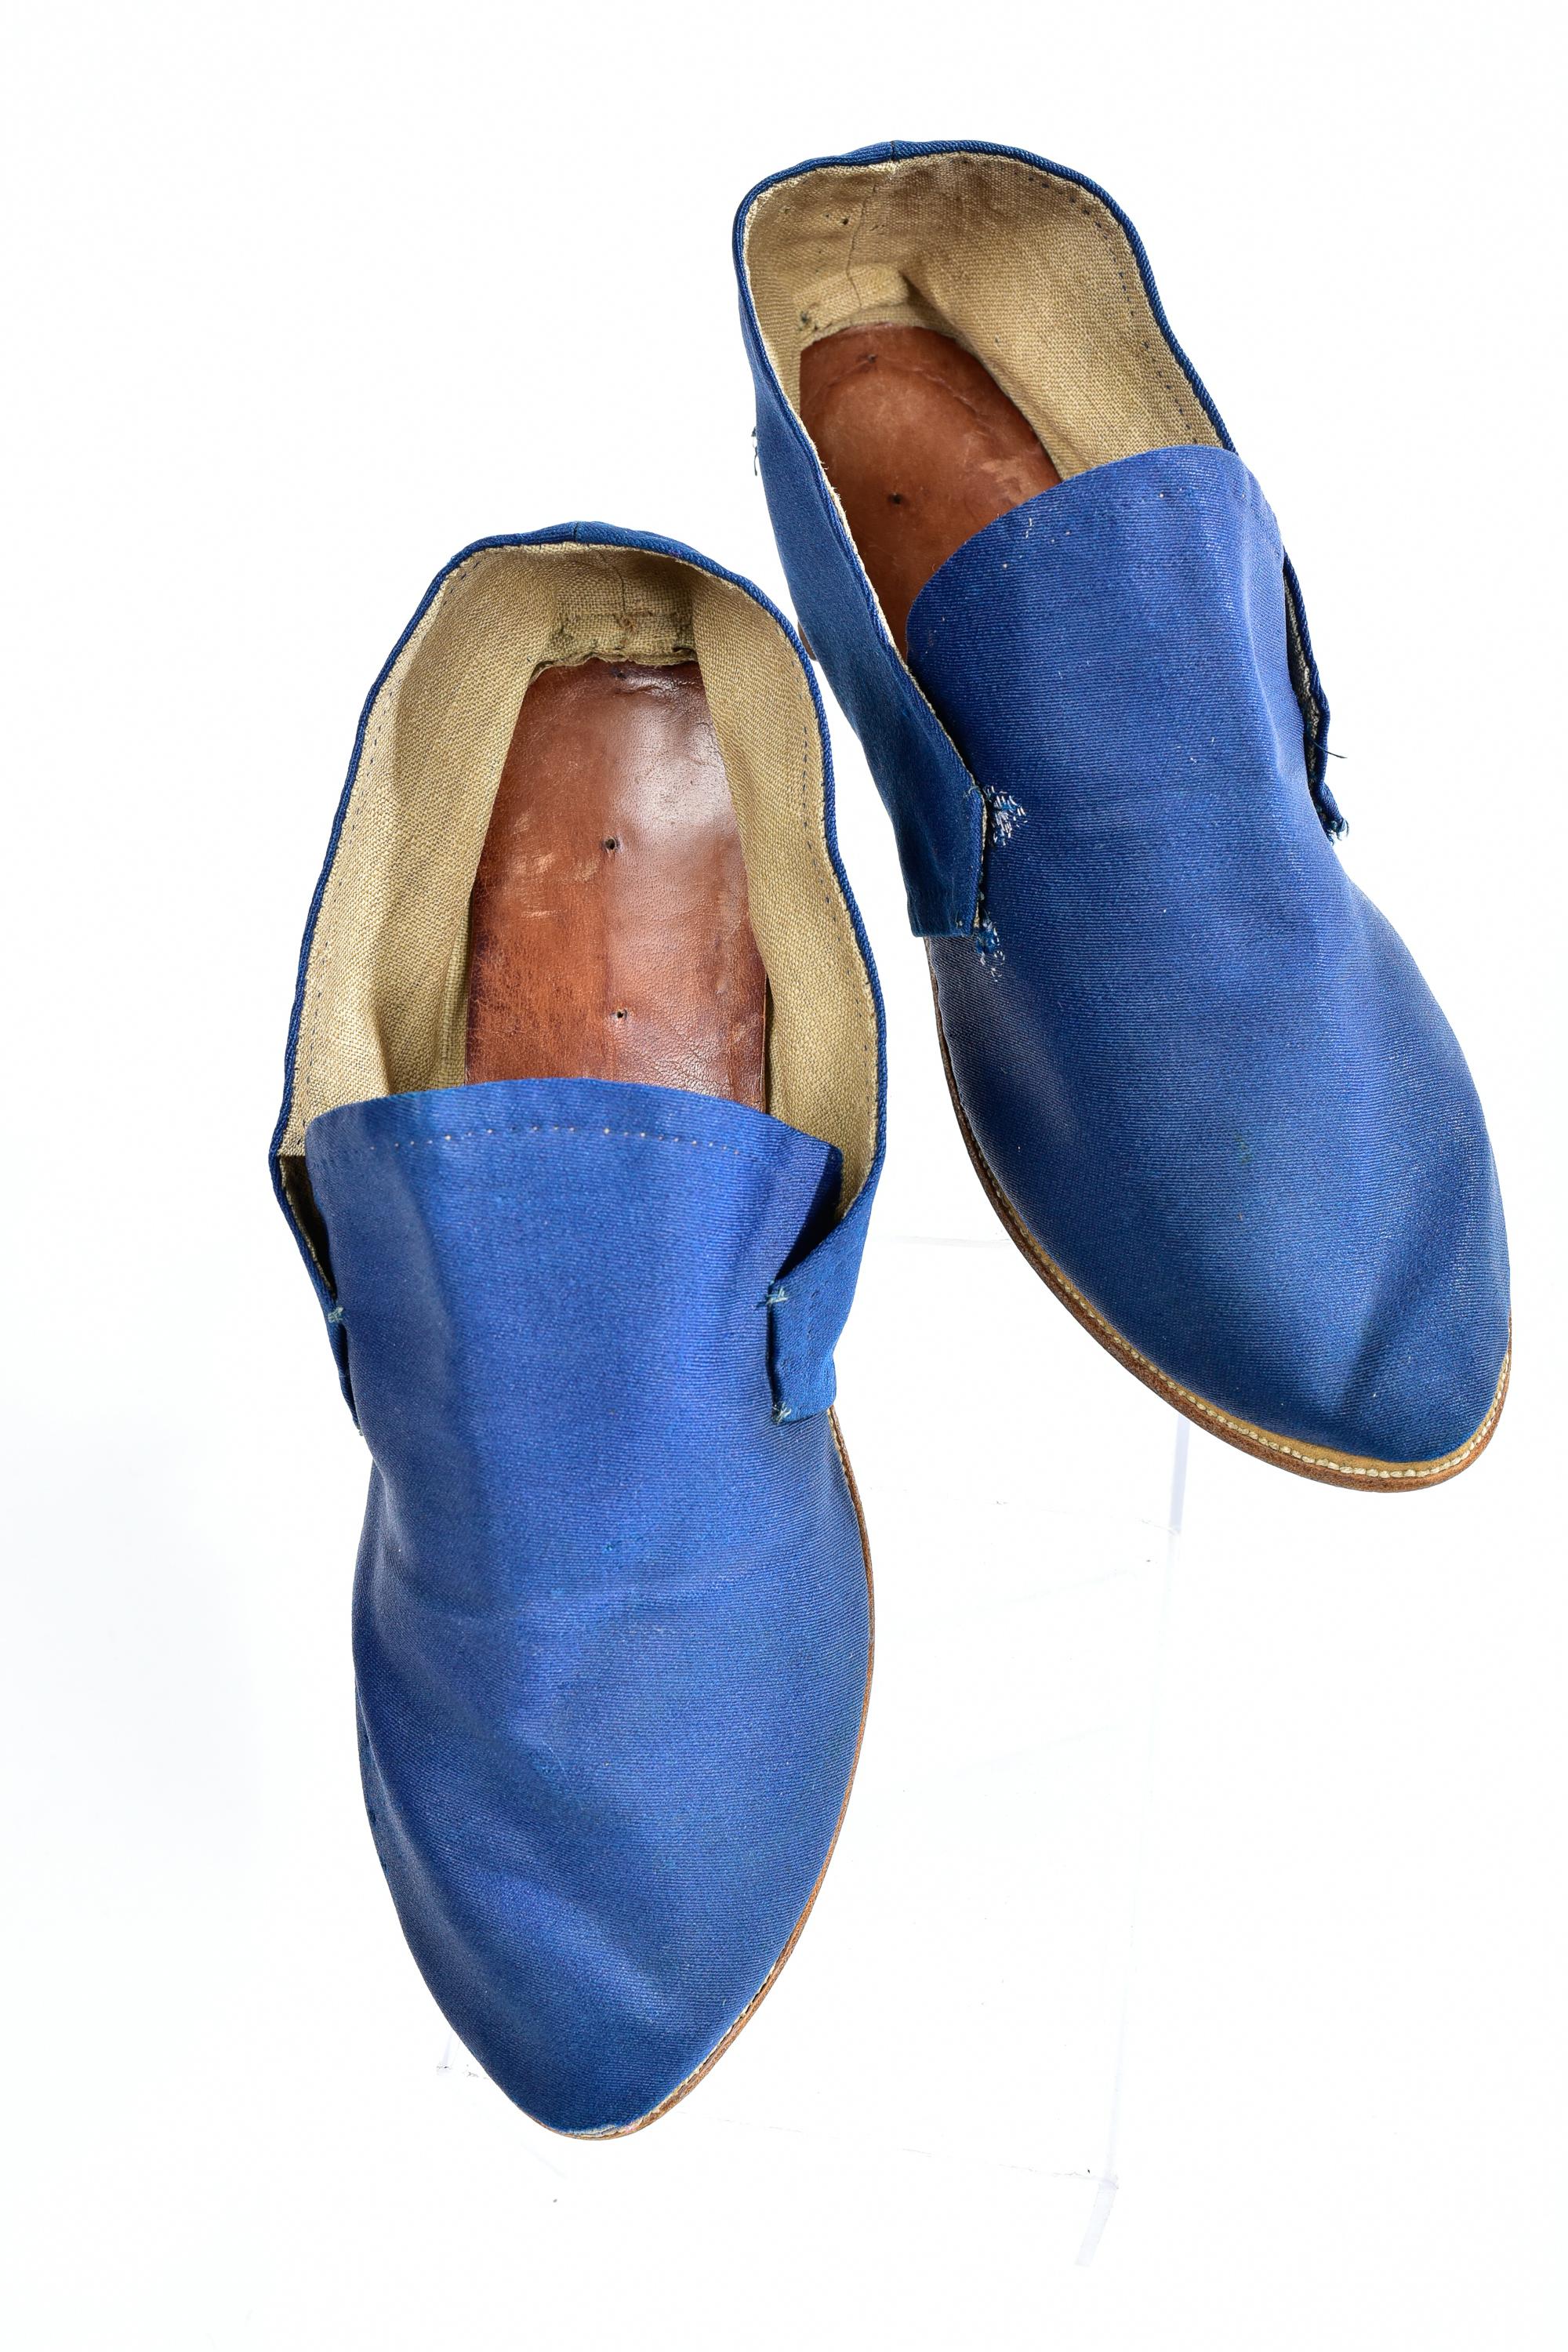 Antique Pair of shoes in glazed wool twill Bleu de France - Louis XVI Circa 1780 For Sale 6